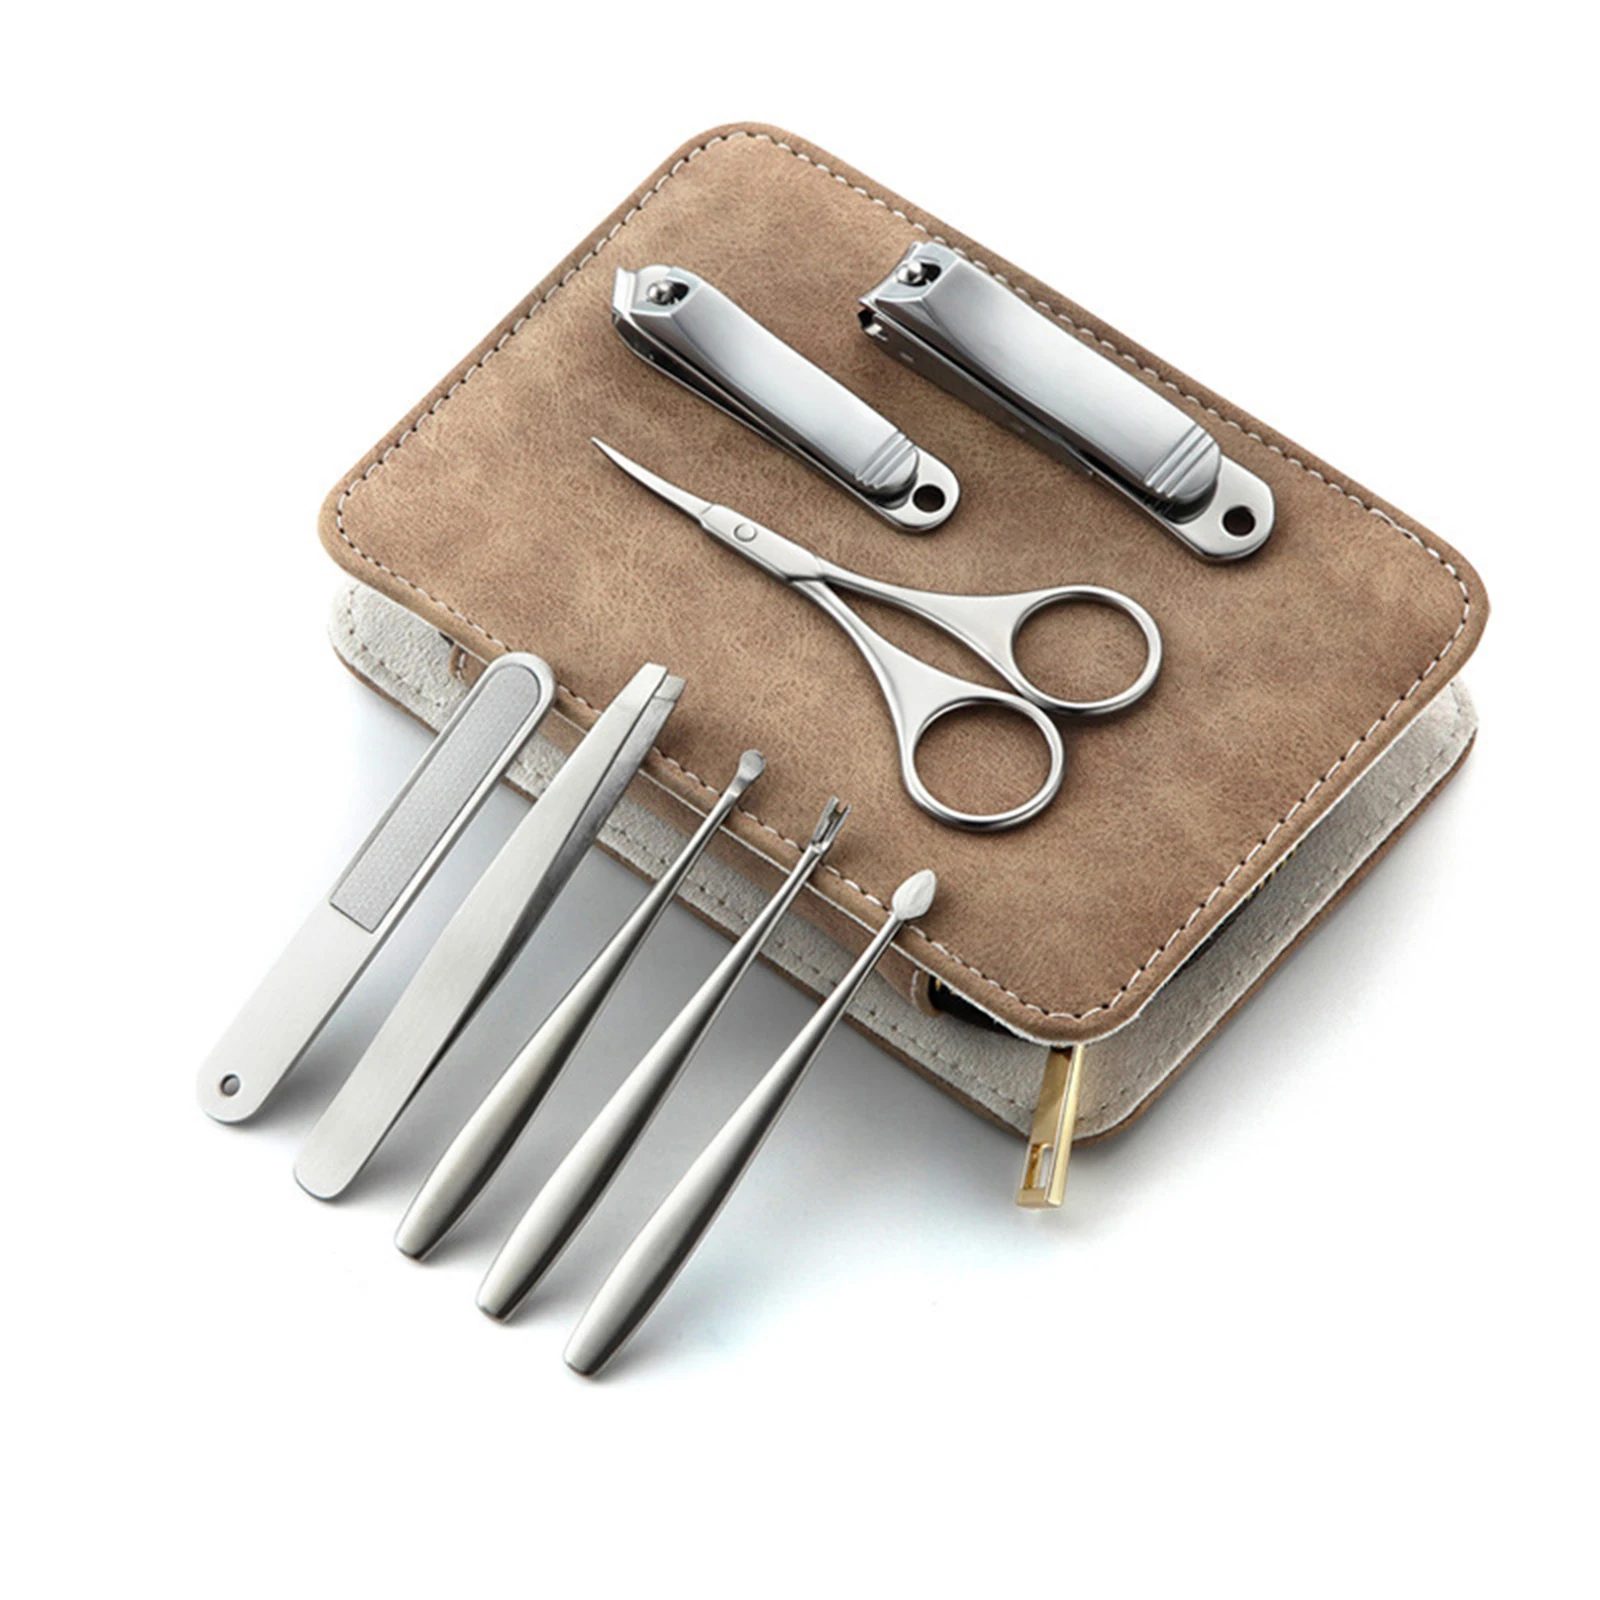 8 in 1 Manicure Set Nail Cutter Tools with Travel PU Case Nail Clipper Nail Scissors Grooming Set for Nail Care Stainless Steel